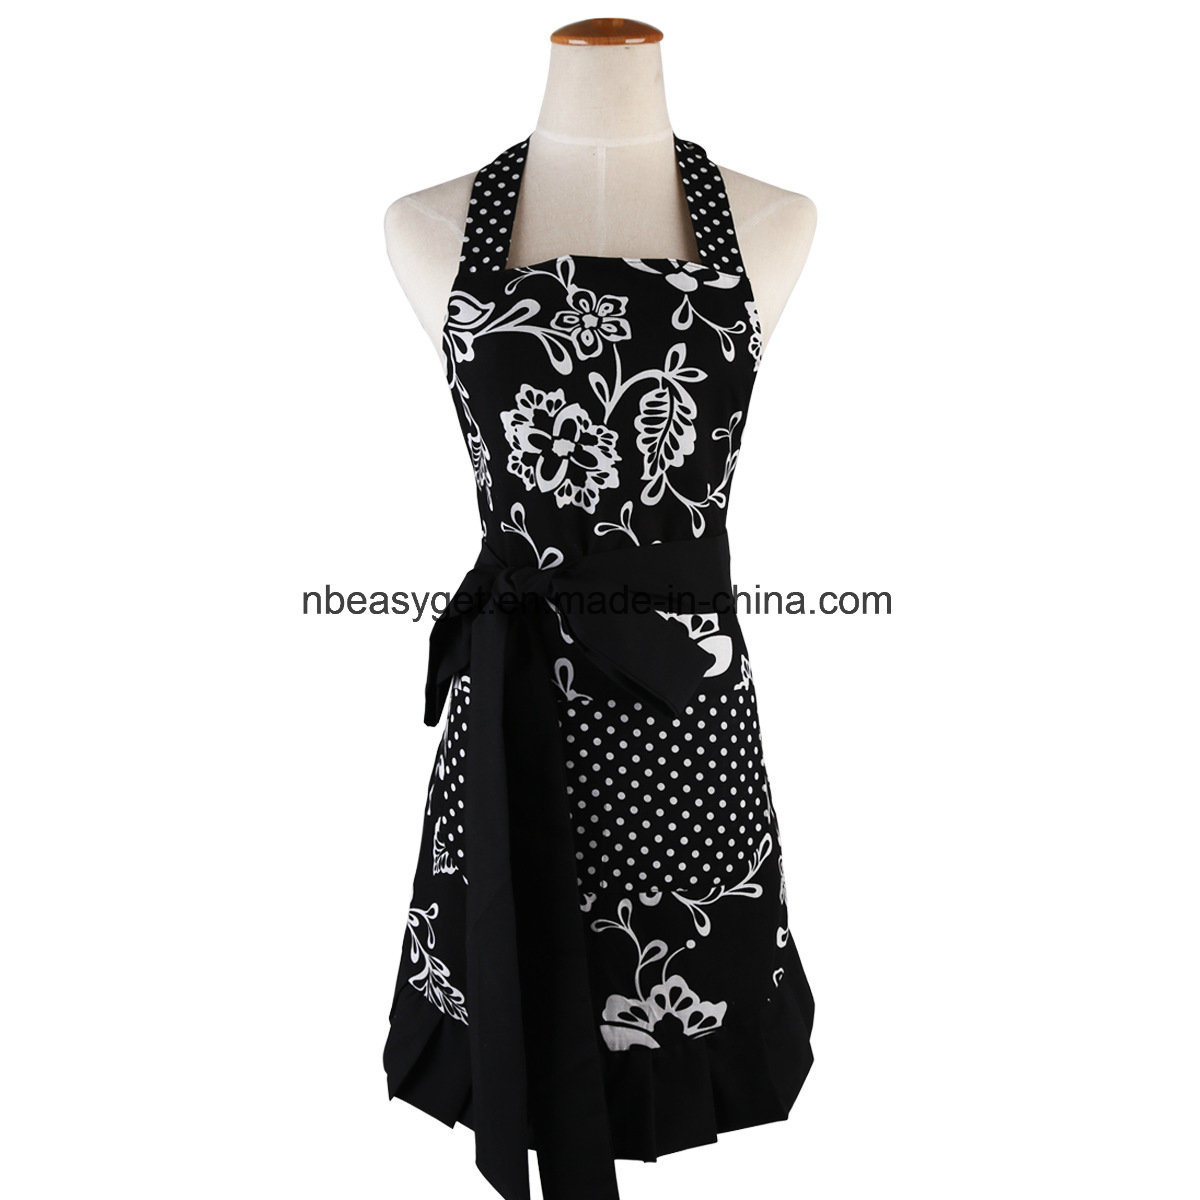 Cute Lovely Lady's Kitchen Fashion Cooking Baking Kitchen Aprons with Pockets for Mother's Day Gift, Blue Esg10224